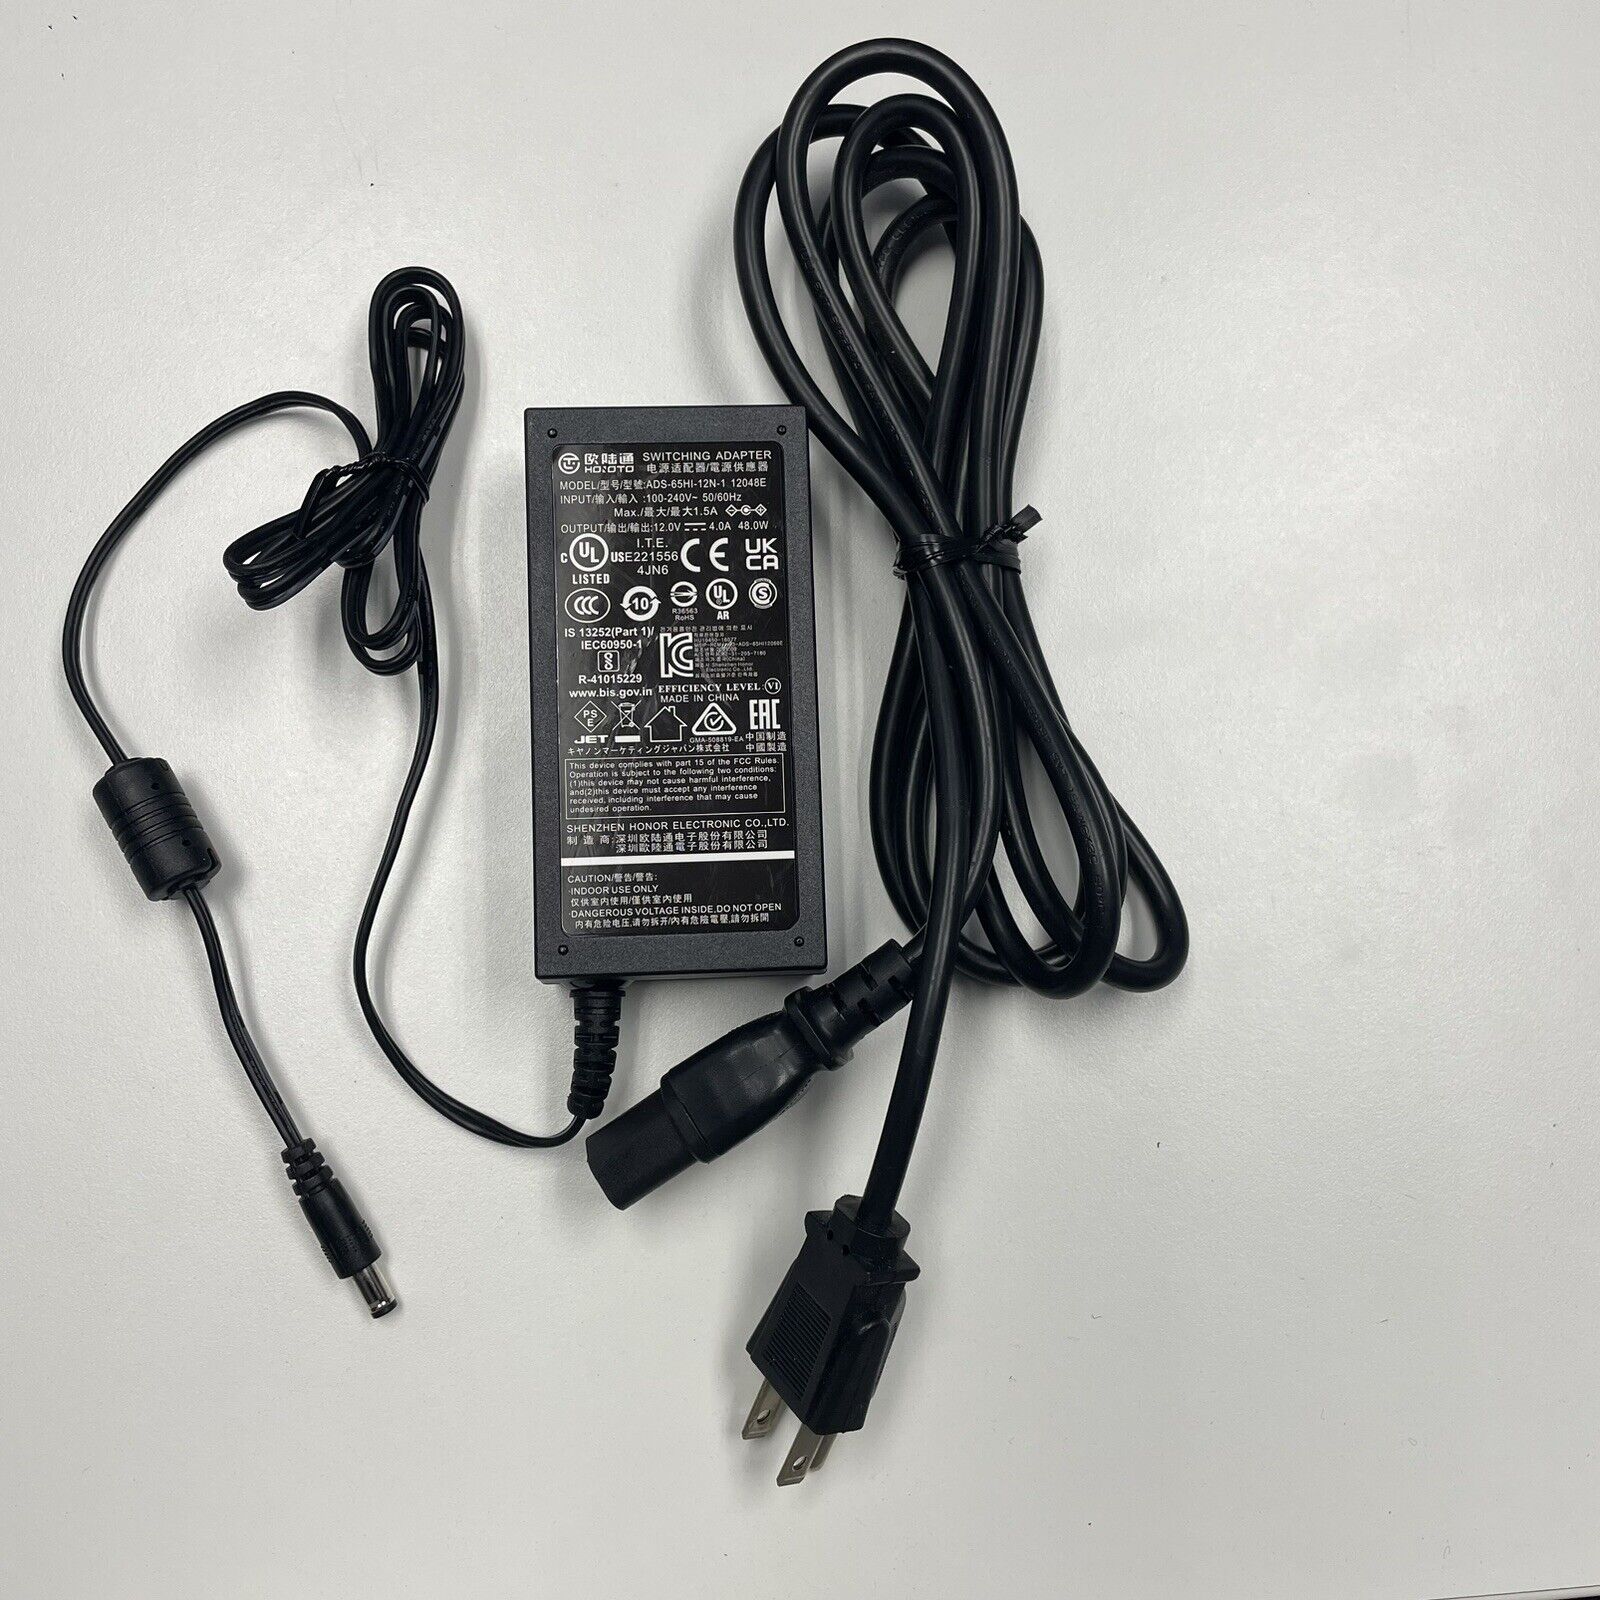 Hoioto ADS-65HI-12N-1 Switching Power Adapter 12V 1.5A